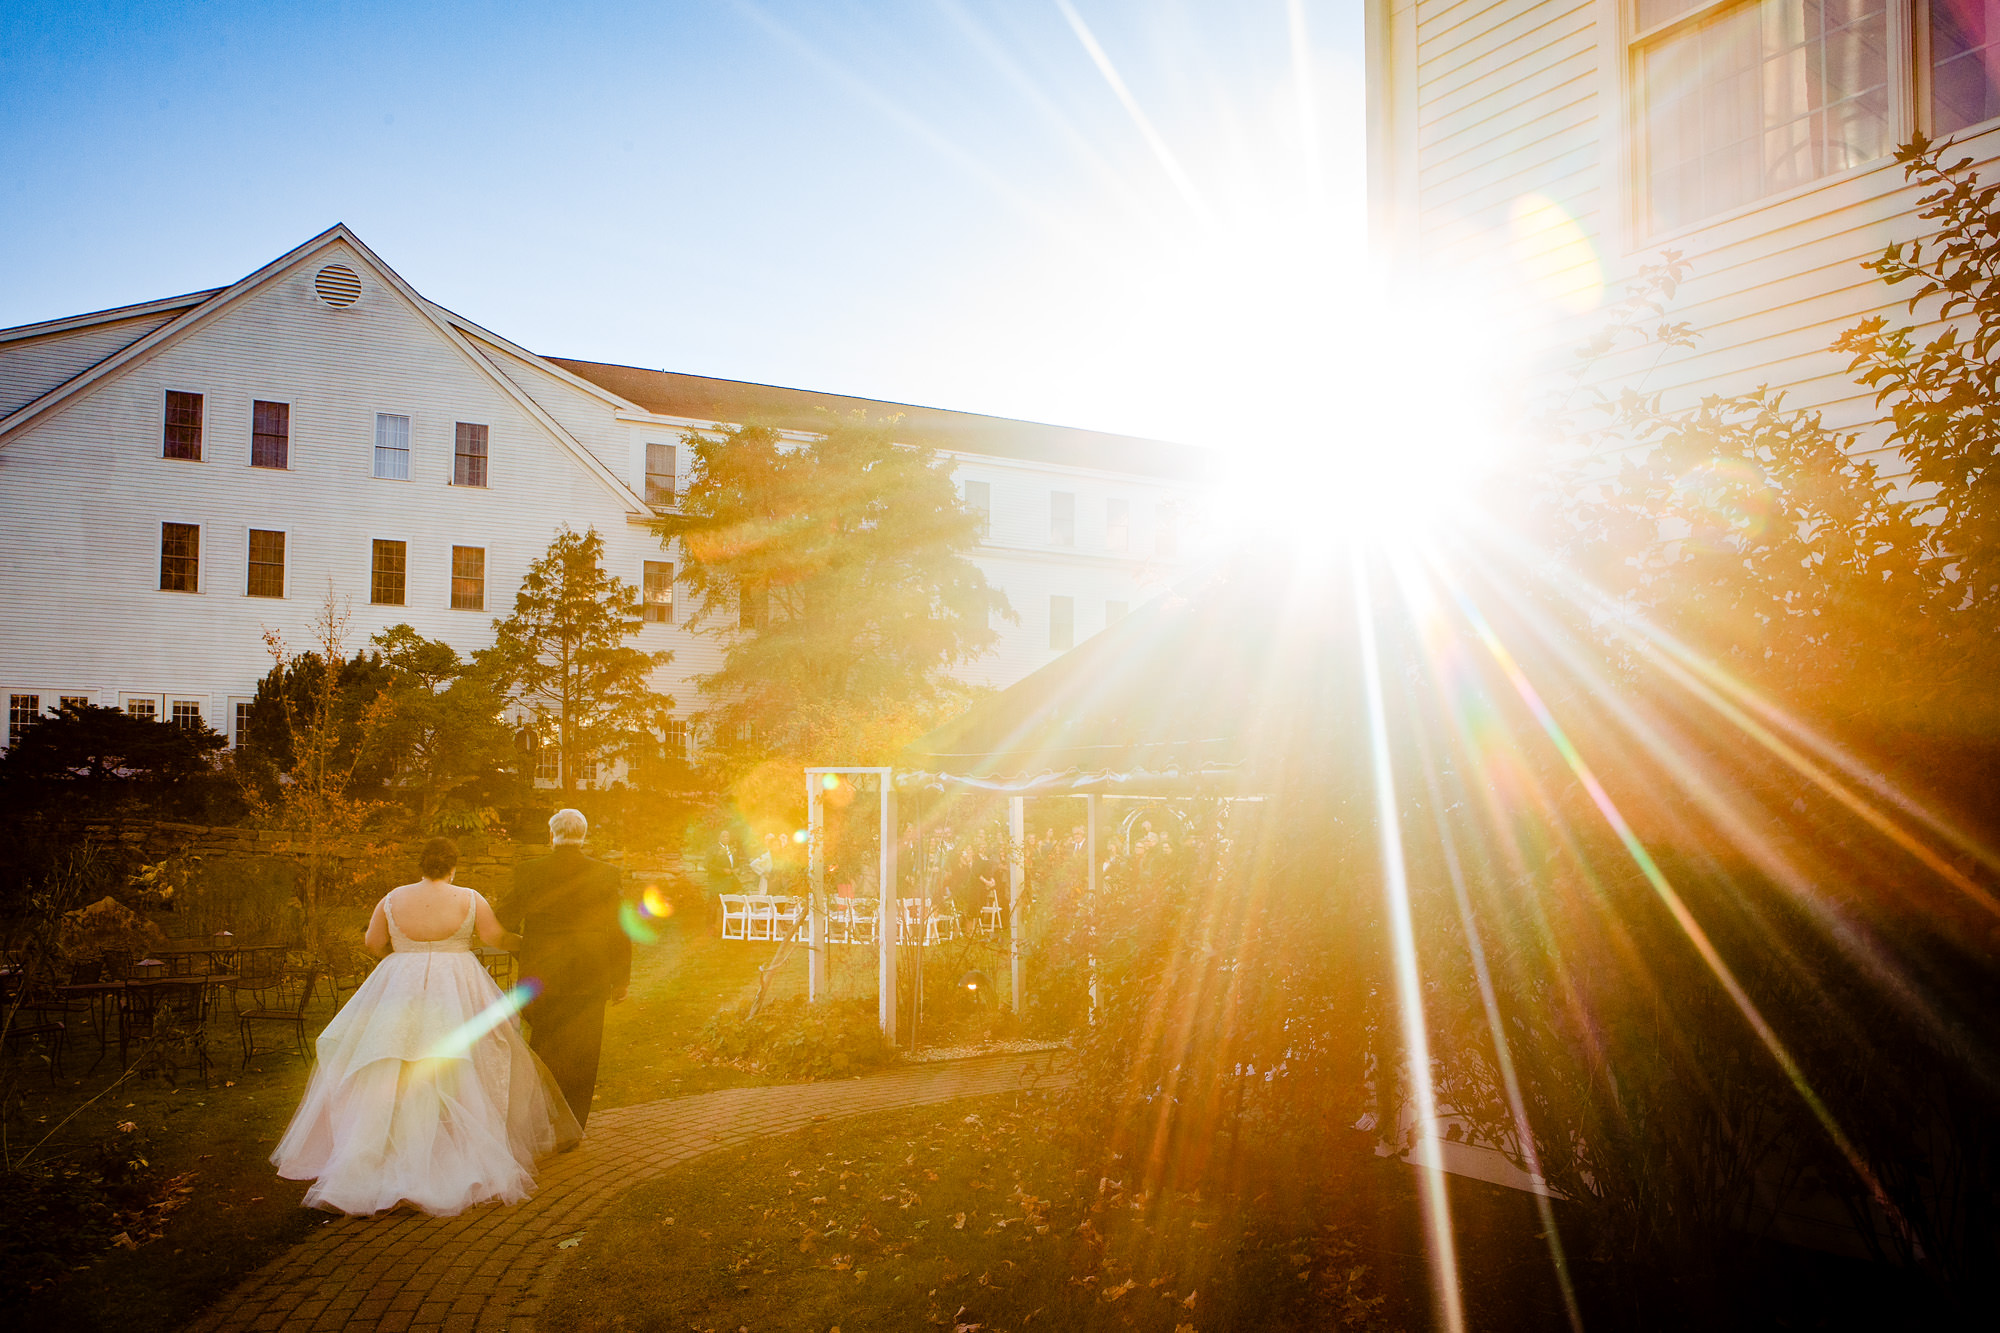 The bride and her father walk into her Harraseeket Inn wedding in Freeport Maine